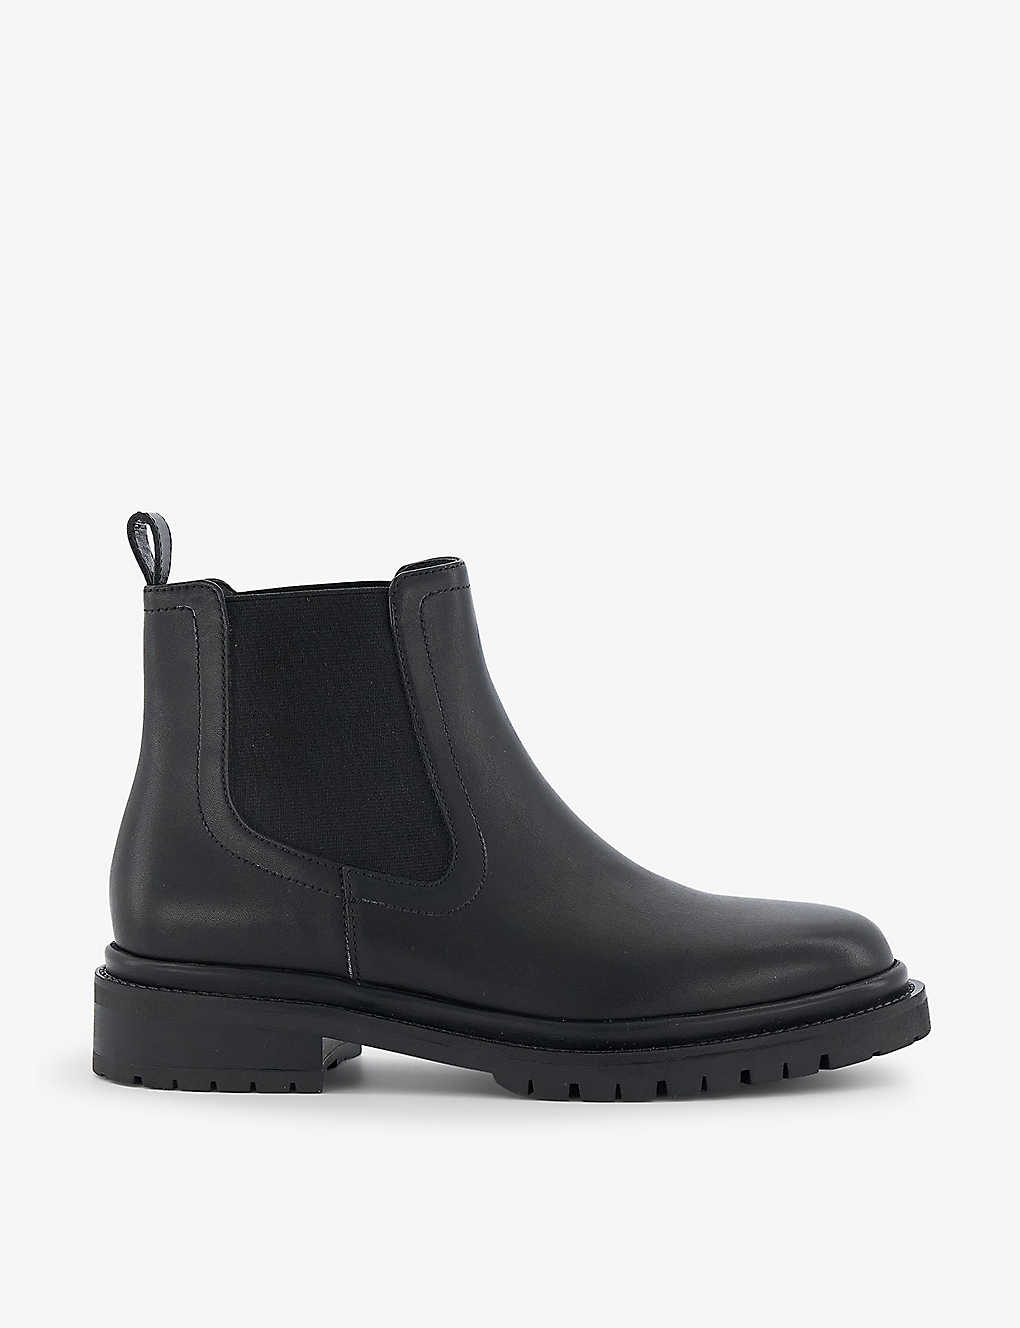 Dune Womens Black-leather Perceive Cleated Leather Chelsea Boots